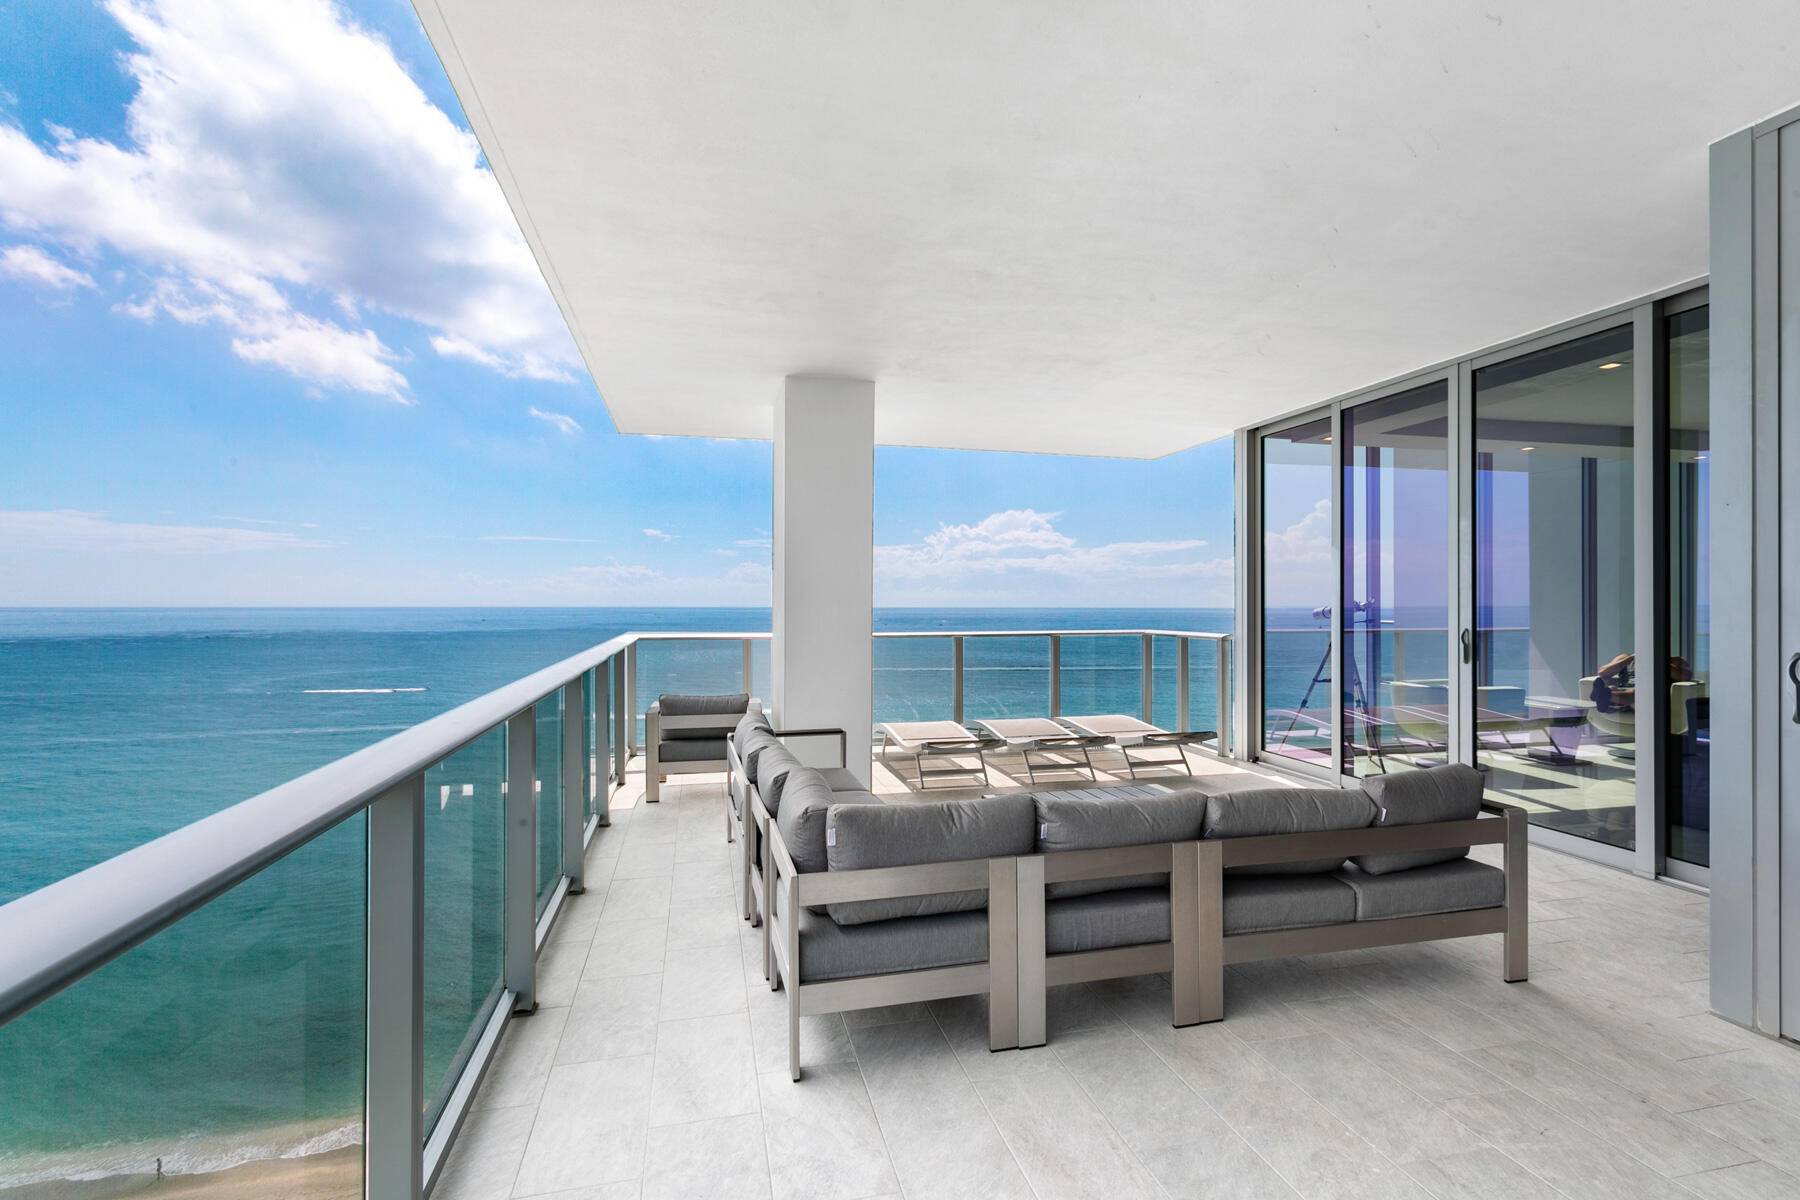 Live in the most luxurious boutique oceanfront building on Singer Island.